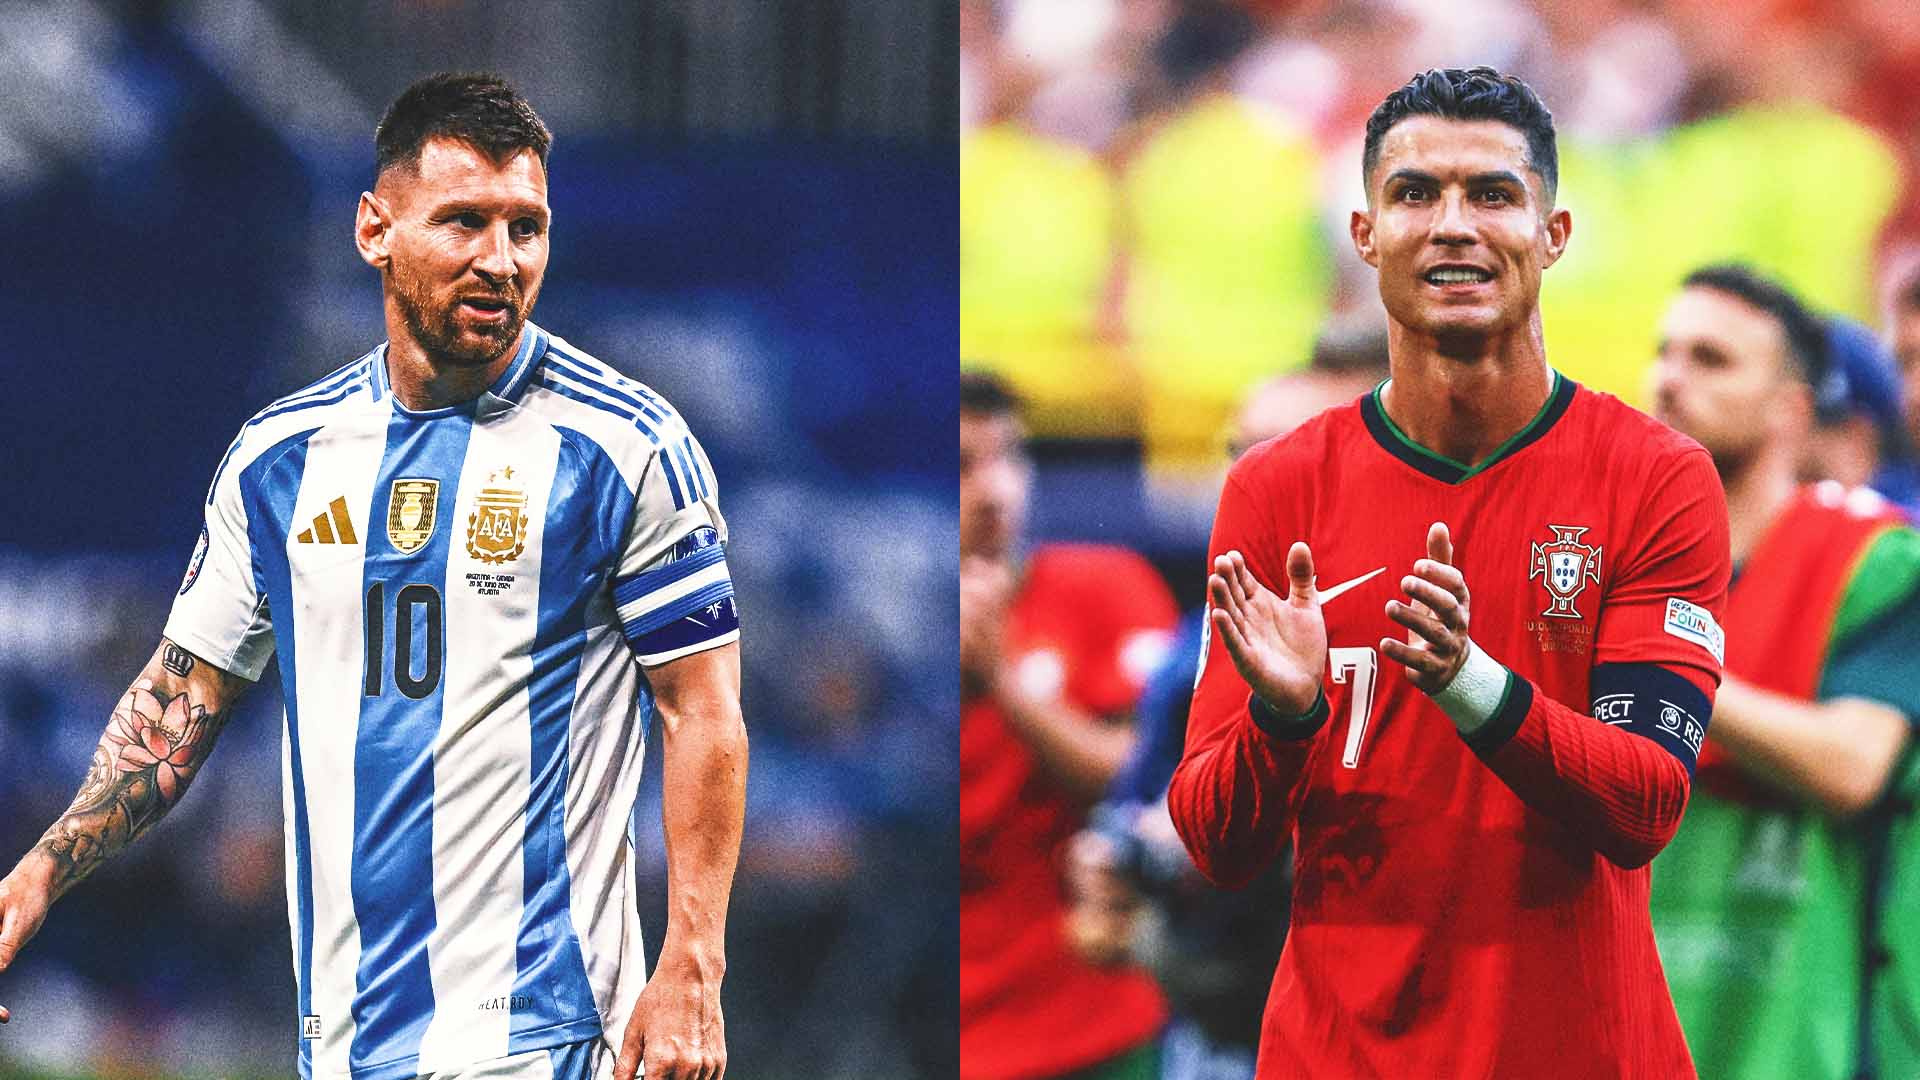 If Ronaldo wins Euros 2024, the G.O.A.T. debate with Messi reopens